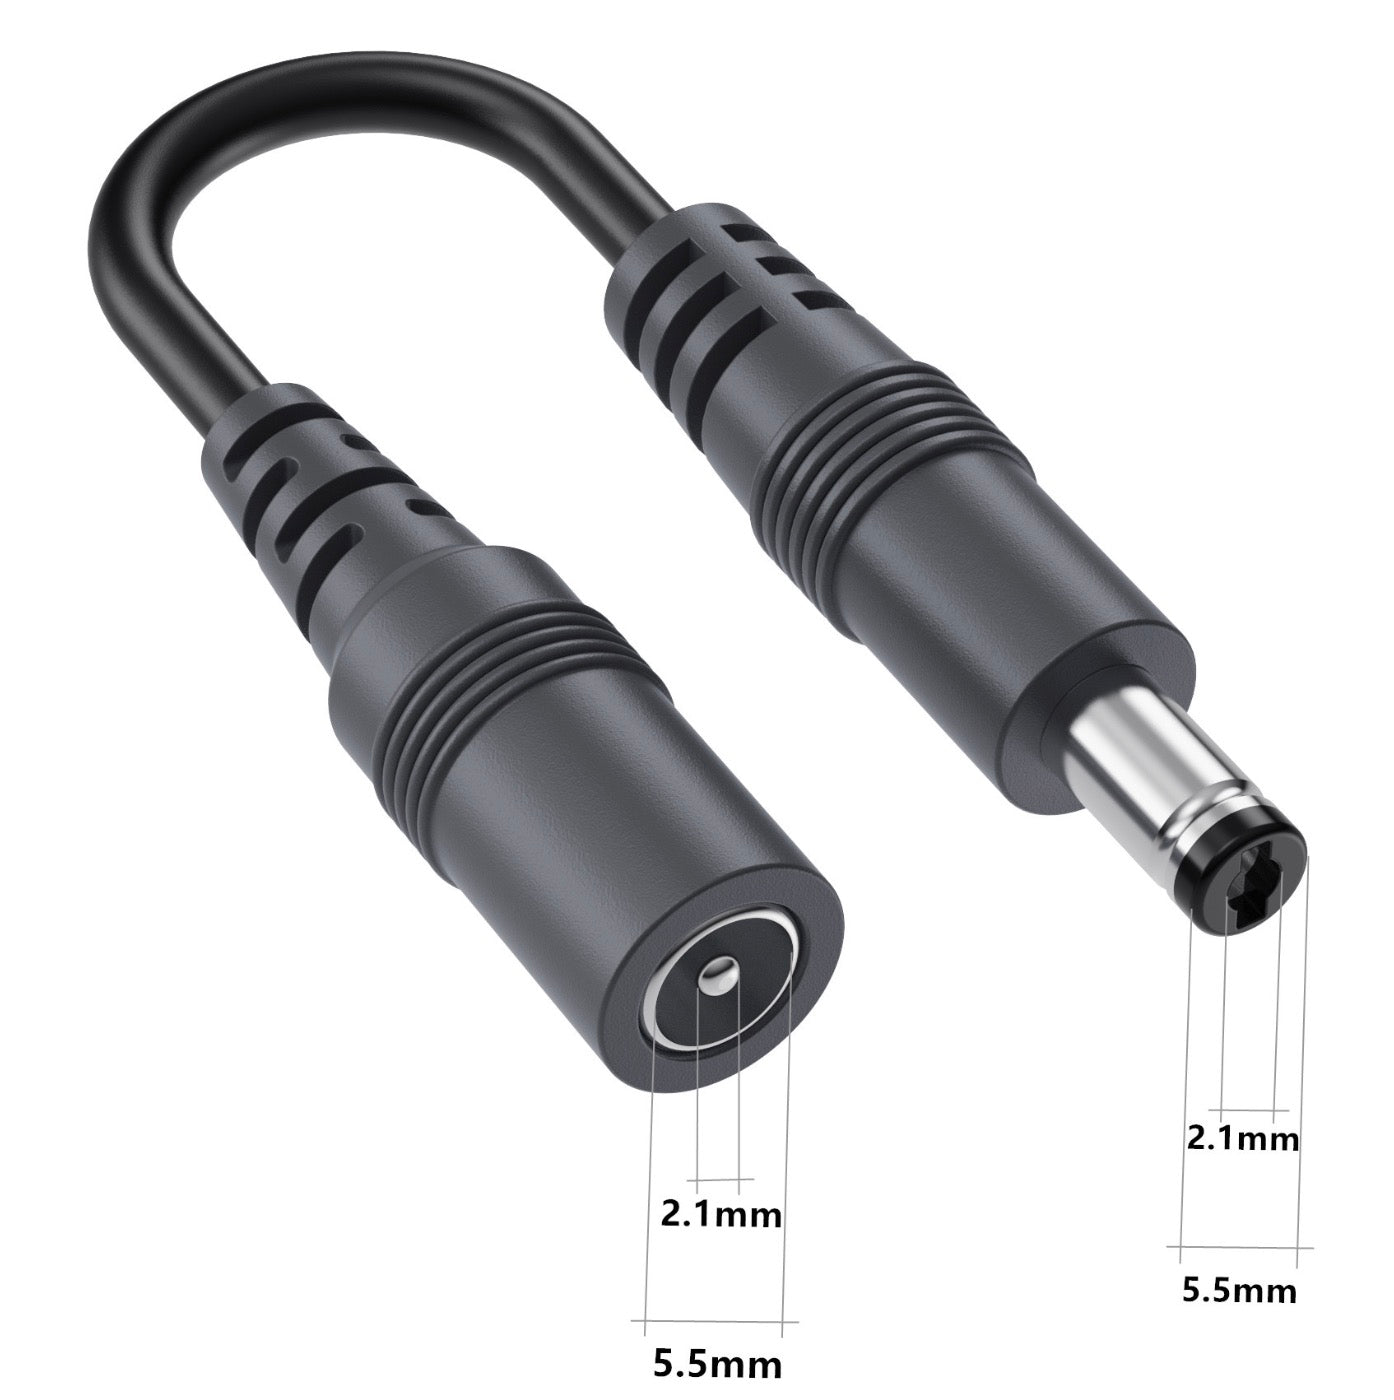 5.5mm x 2.1mm DC Male to Female Power Extension Cable for LED Strip, CCTV, Car, Monitors